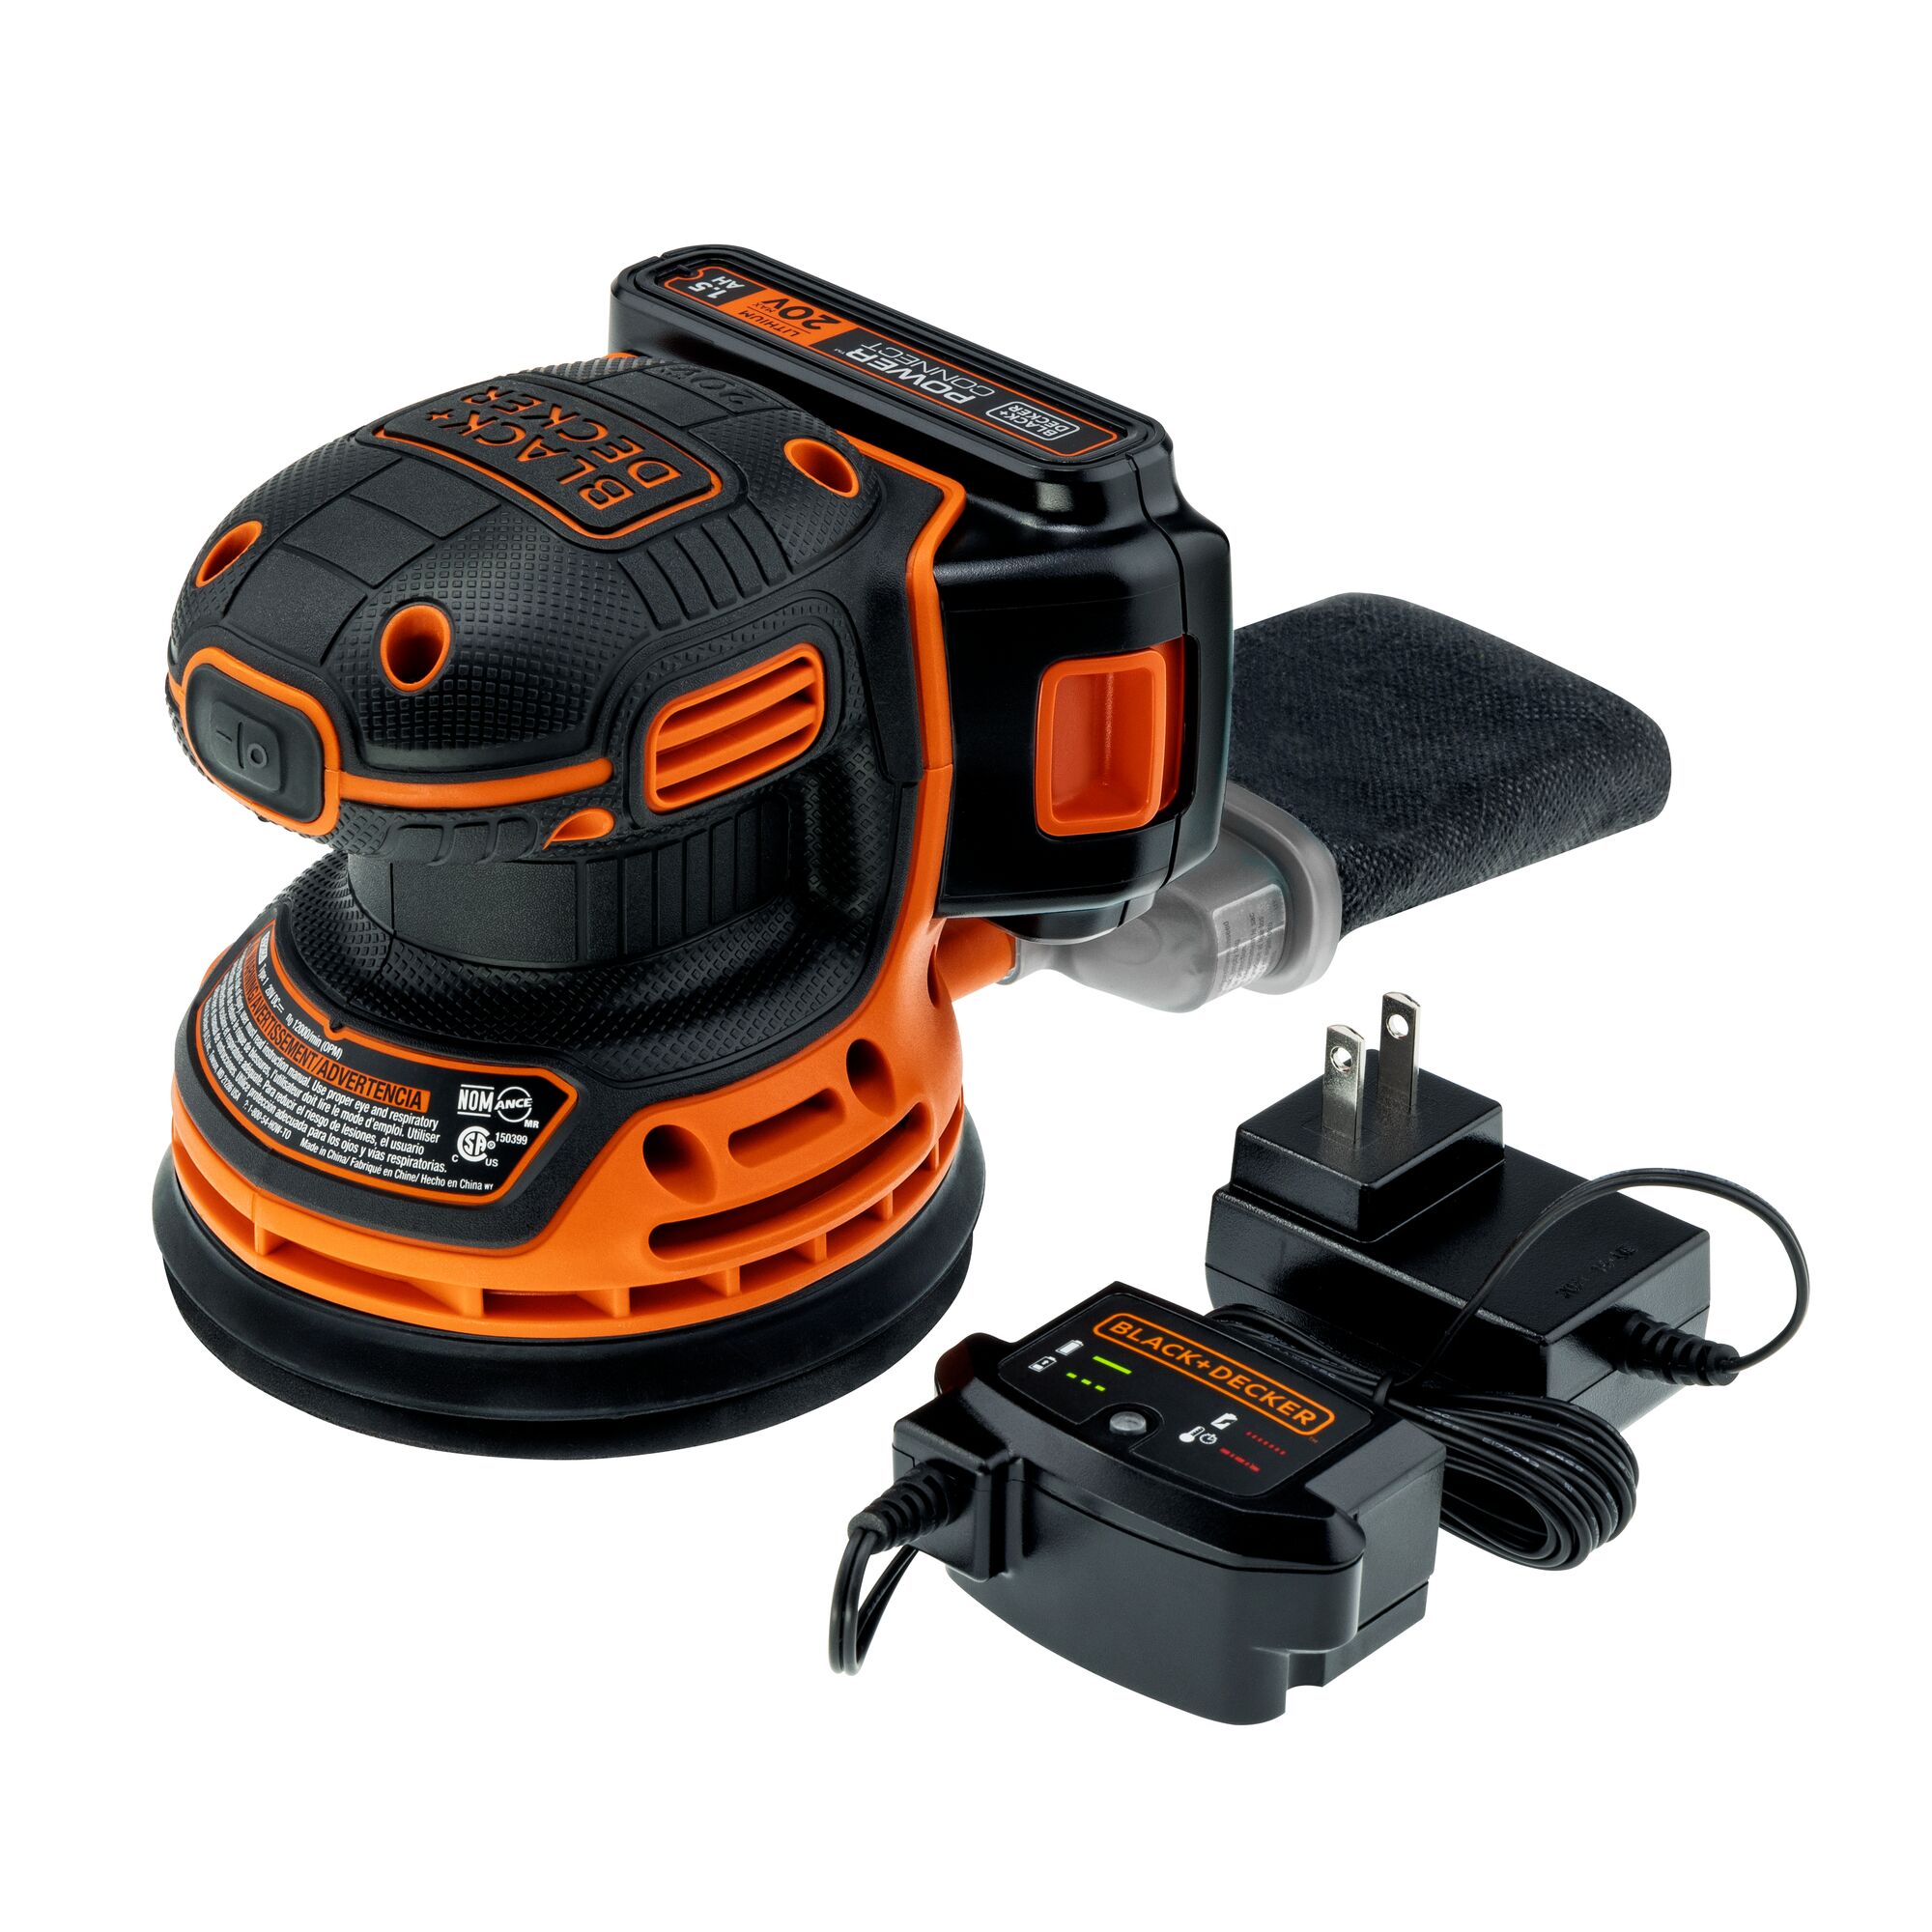 3/4 angle of 20 volt max cordless sander with charger